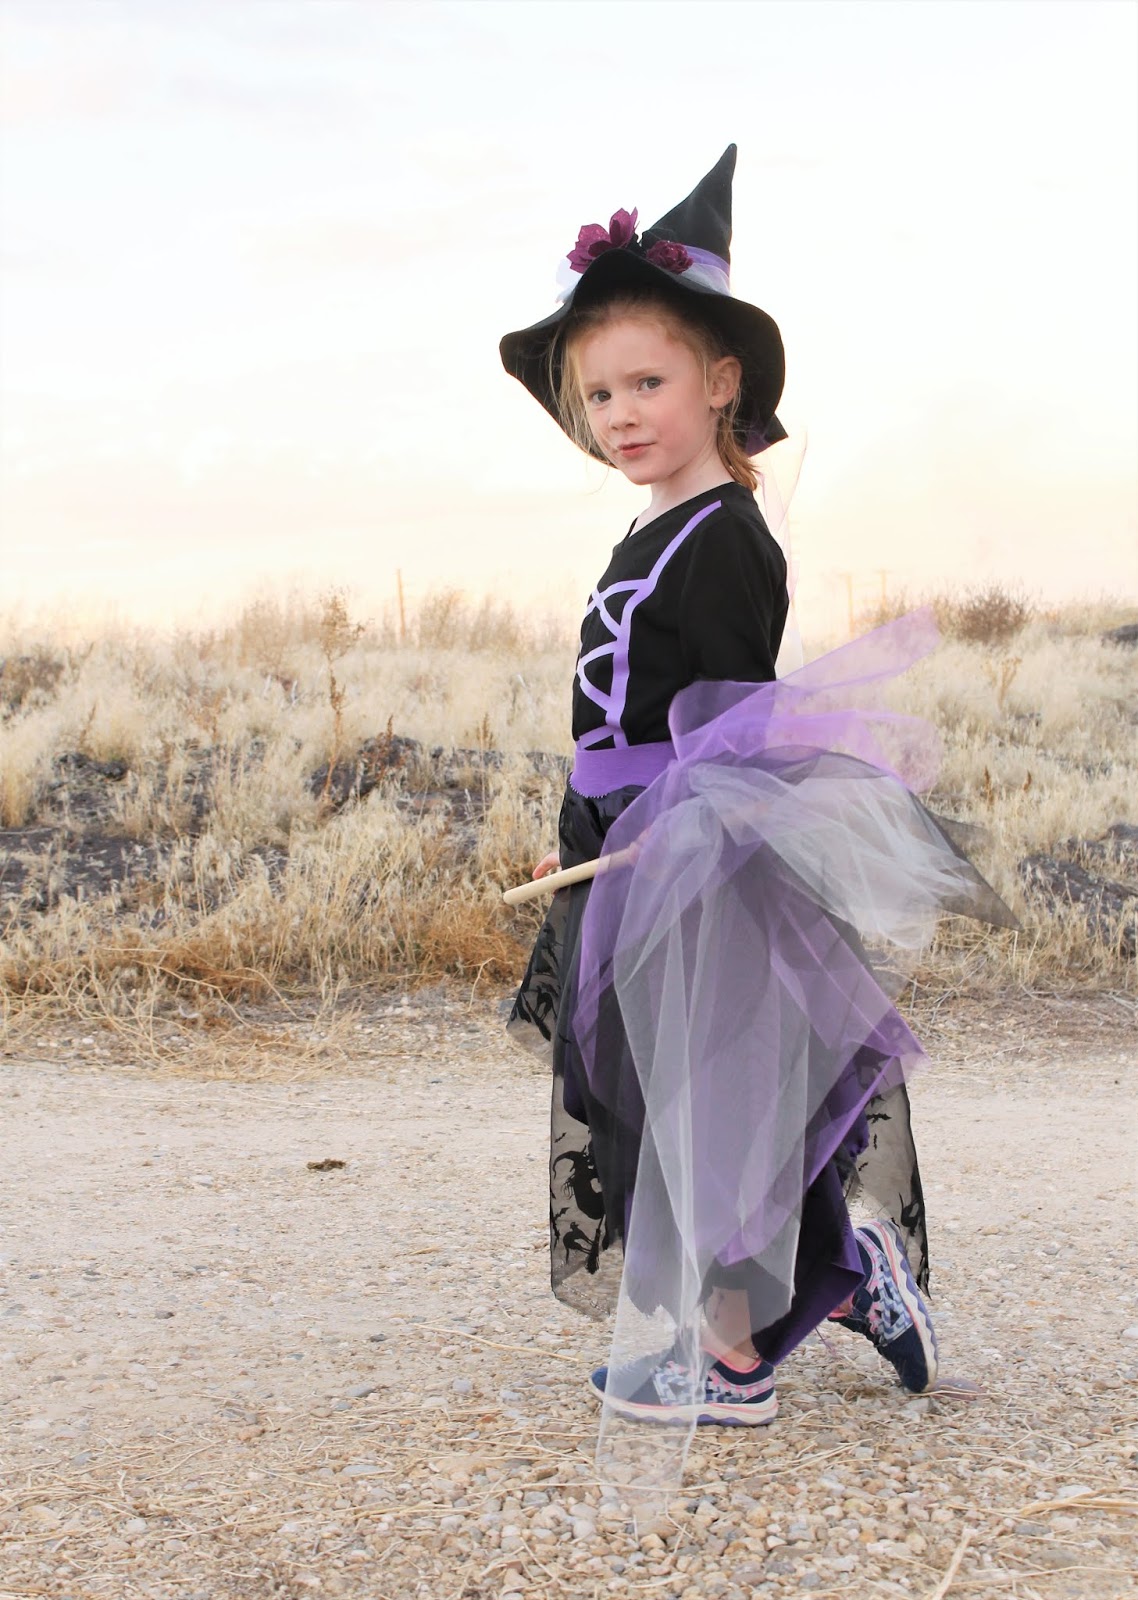 Homemade Witch Costume Ideas For Women